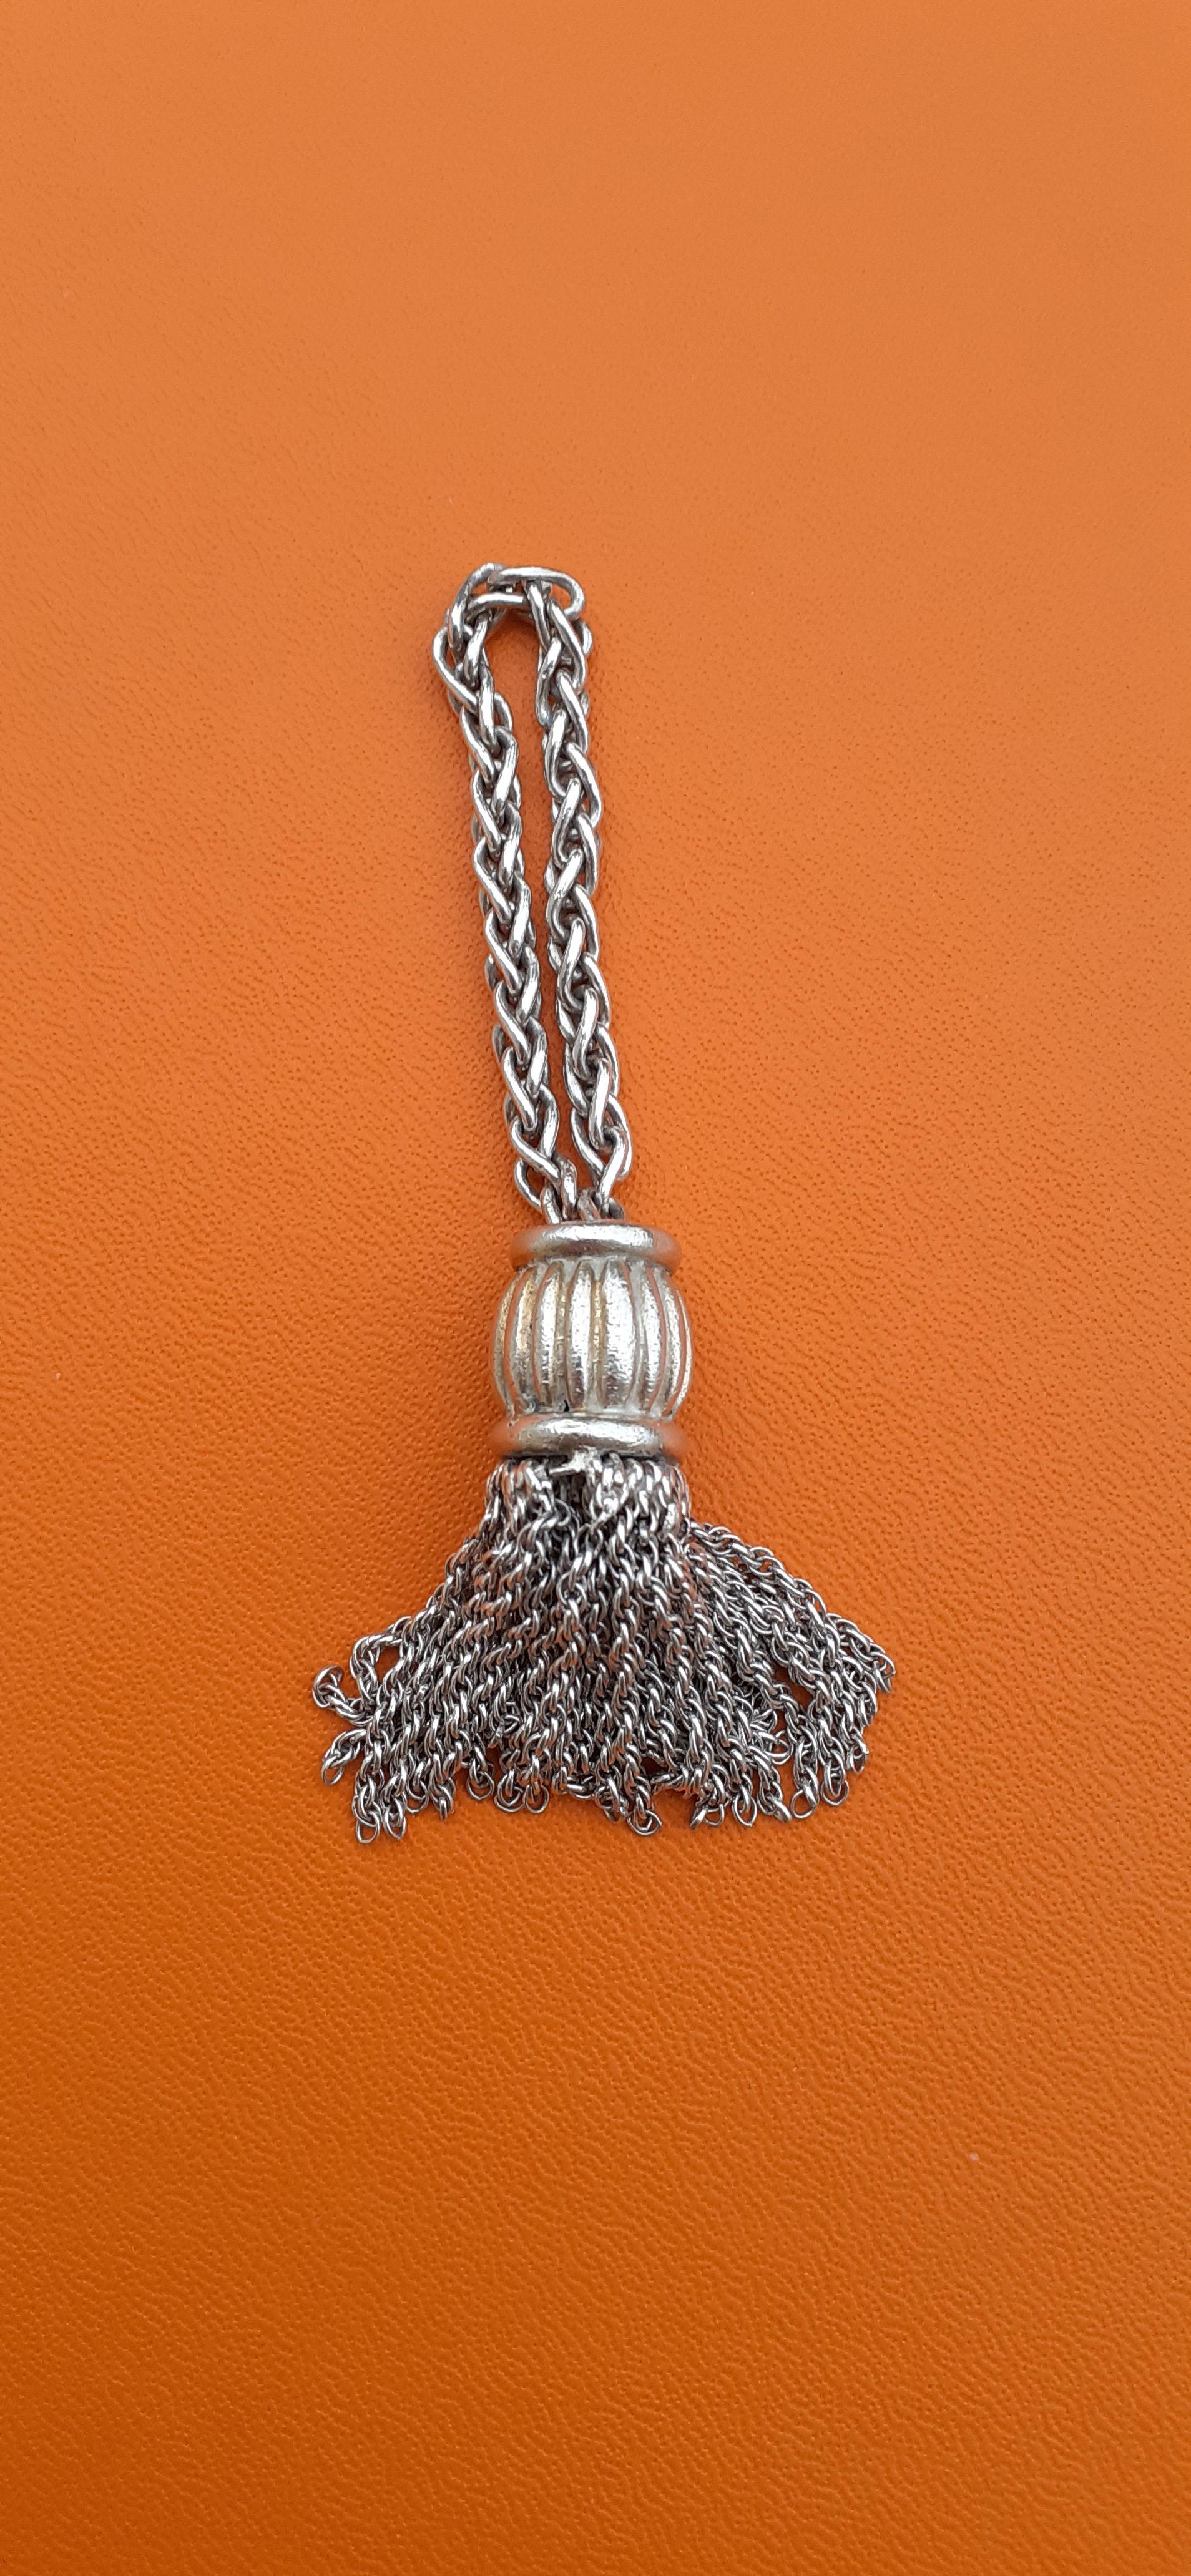 Rare Collectible Authentic Hermès Key Holder

In shape of a trimmings tassel

Vintage item

Made of silver

Colorway: silvery

Opens by pressing on the ribbed part

